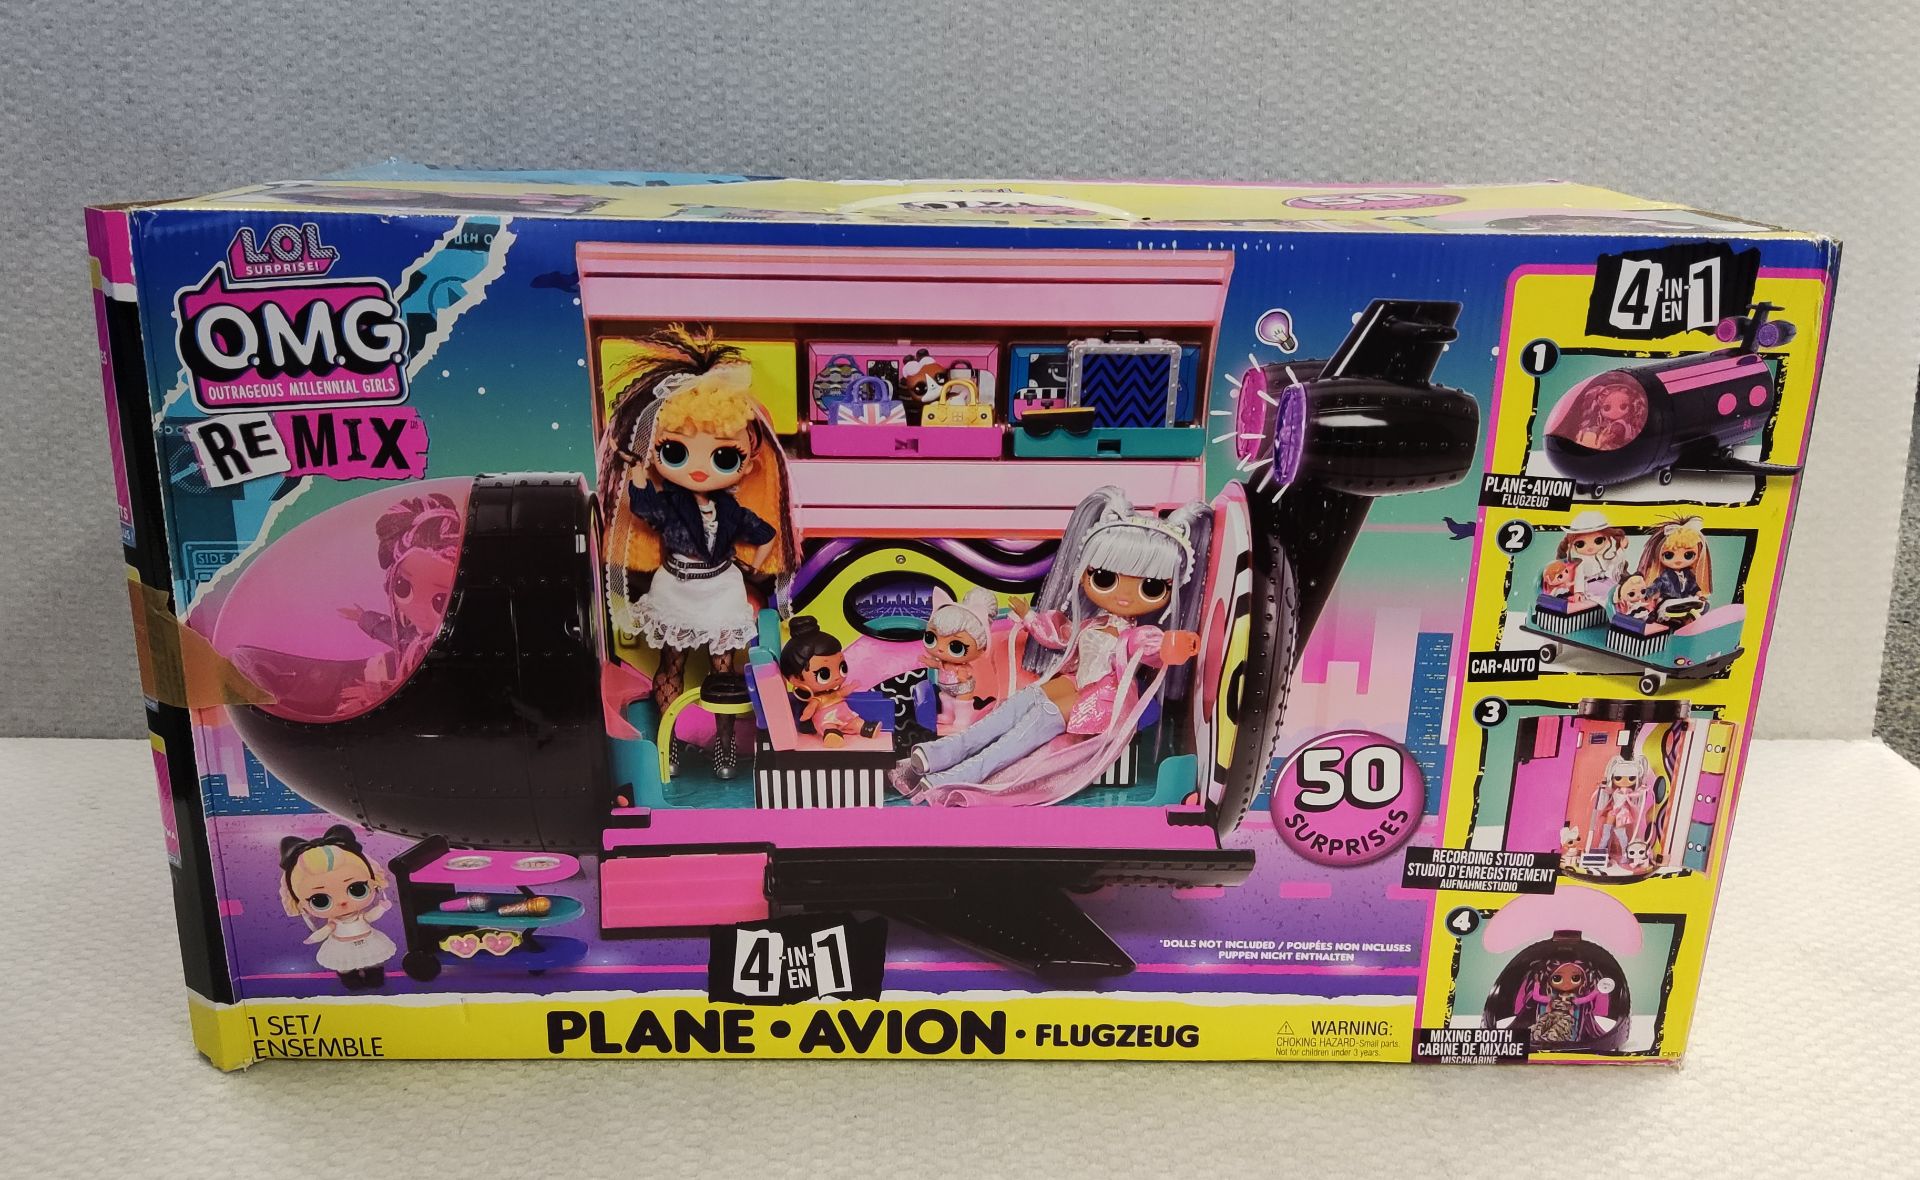 1 x LOL Surprise OMG Remix 4 in 1 Plane Playset - New/Boxed - Image 2 of 7